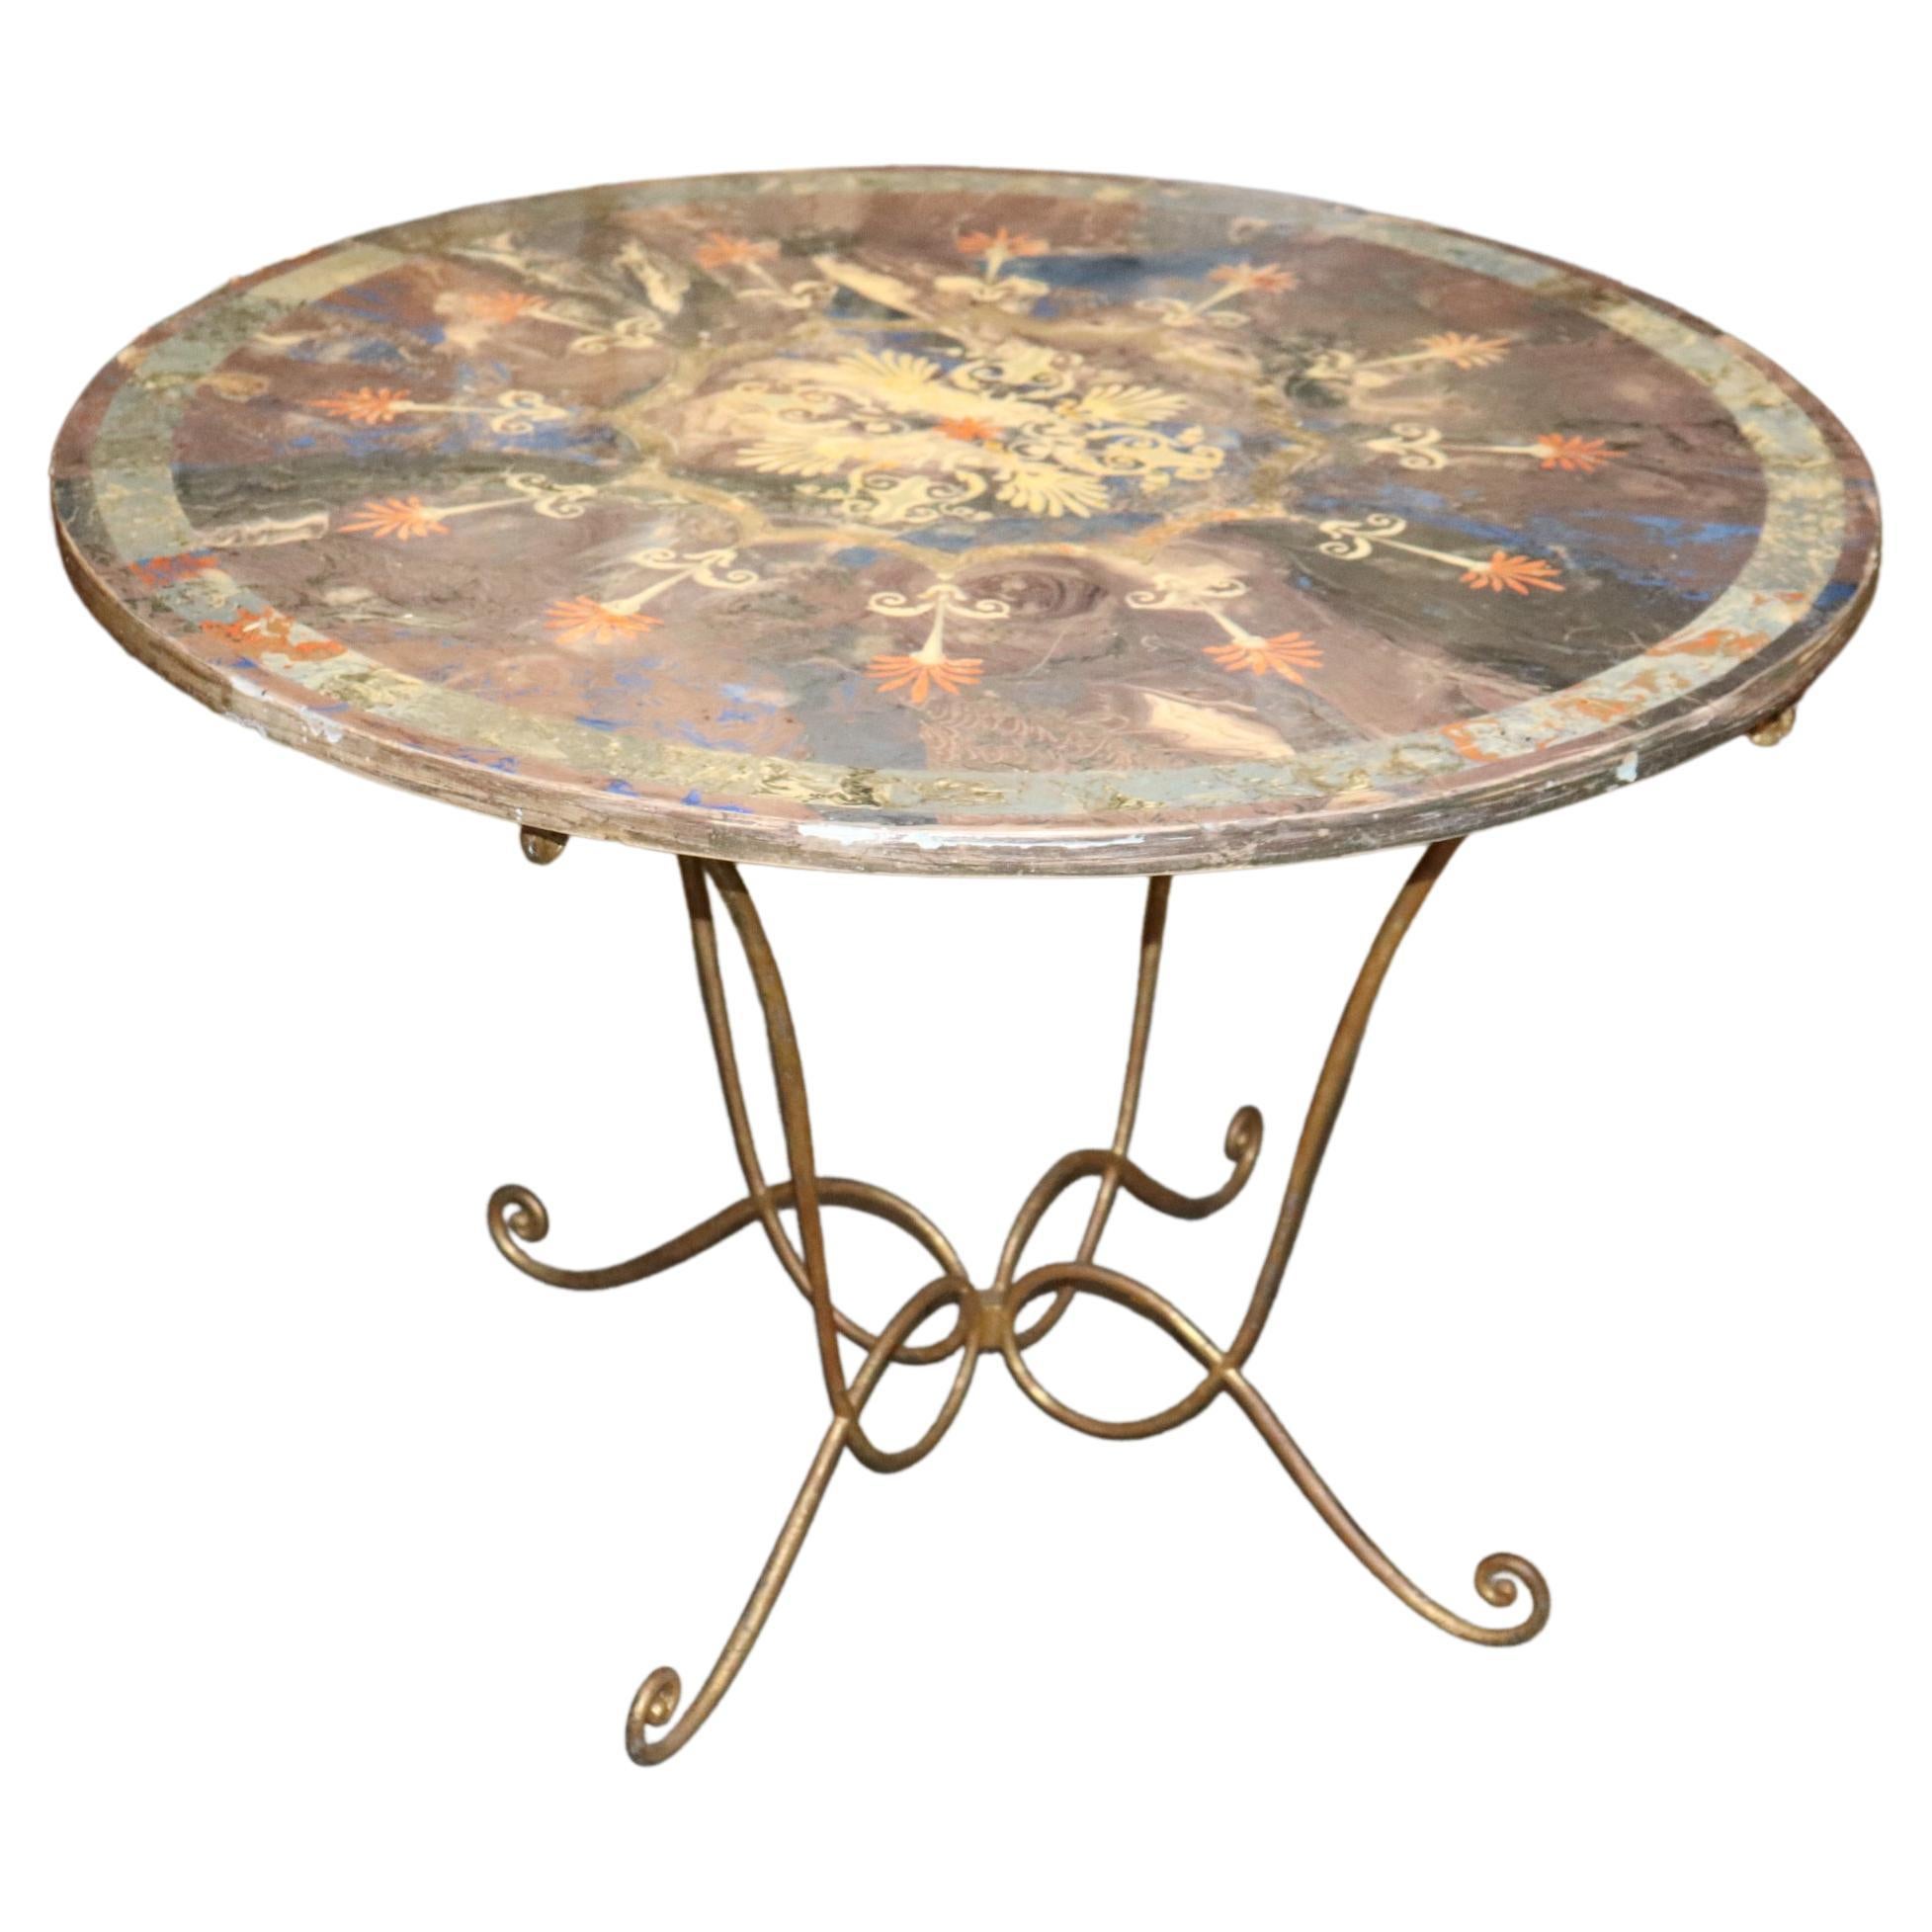 Rare Scagliola Decorated Gilded Wrought Iron Base Center Table For Sale